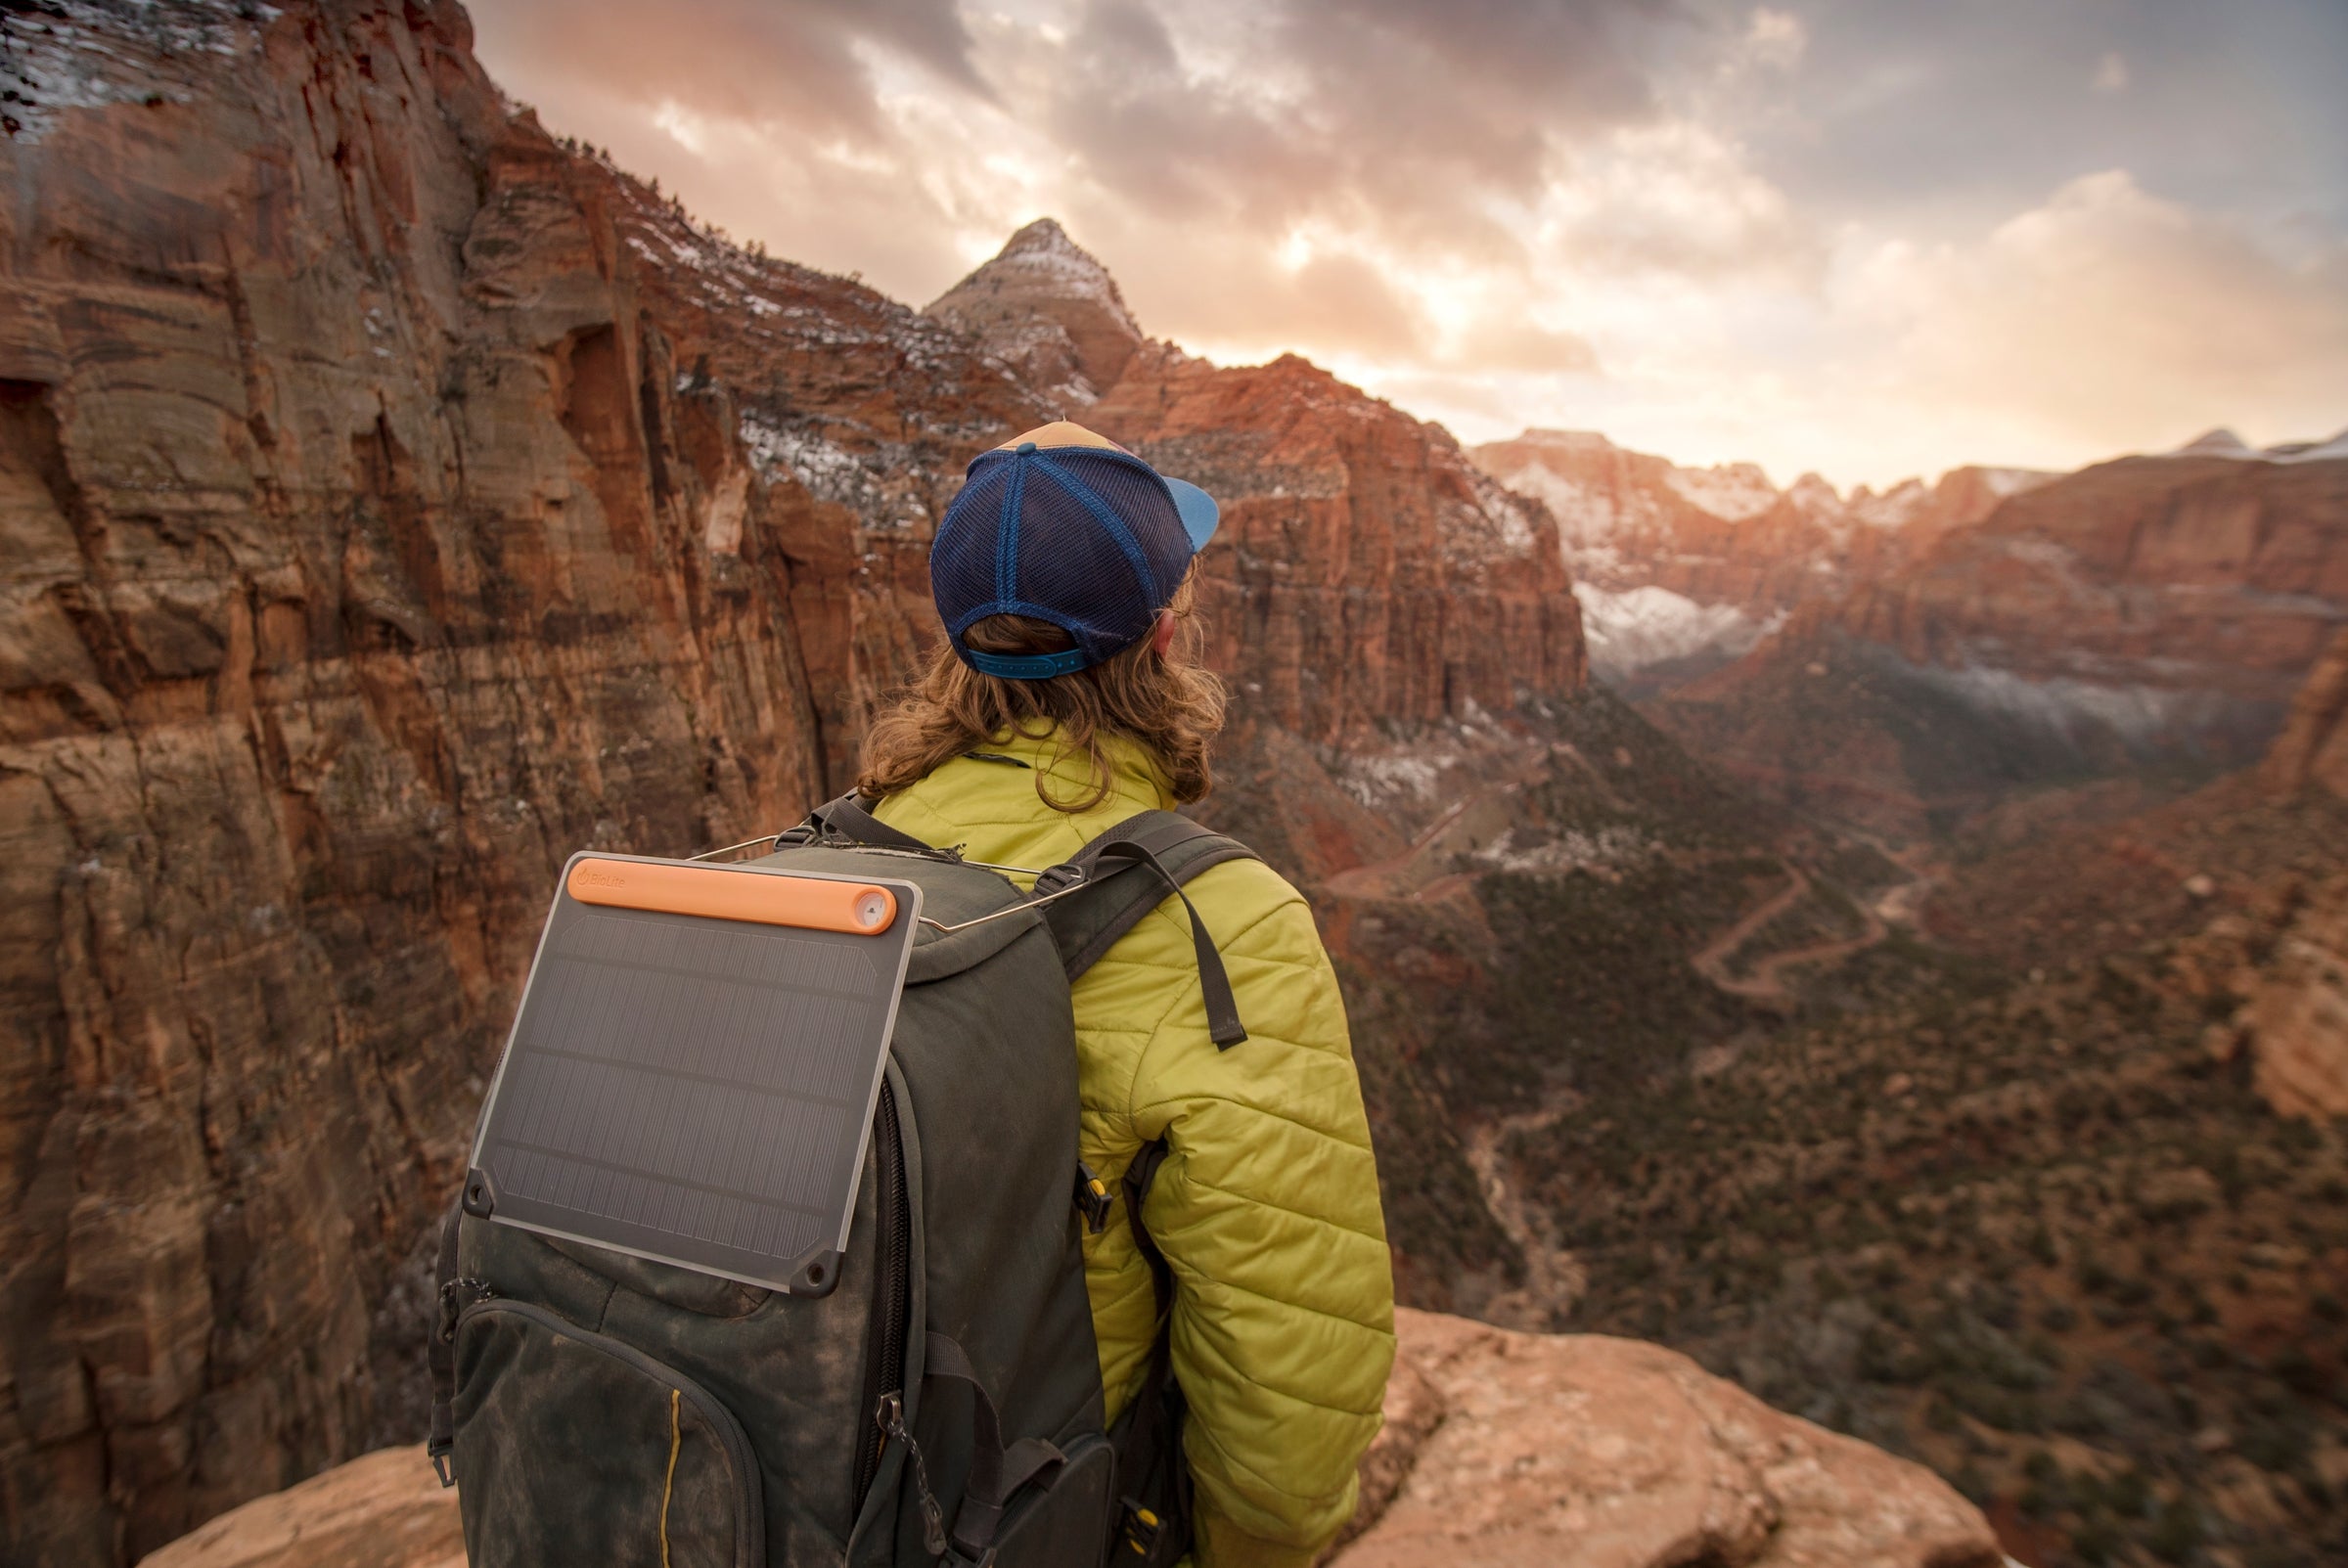 Biolite Solar Panel can attach to your backpack